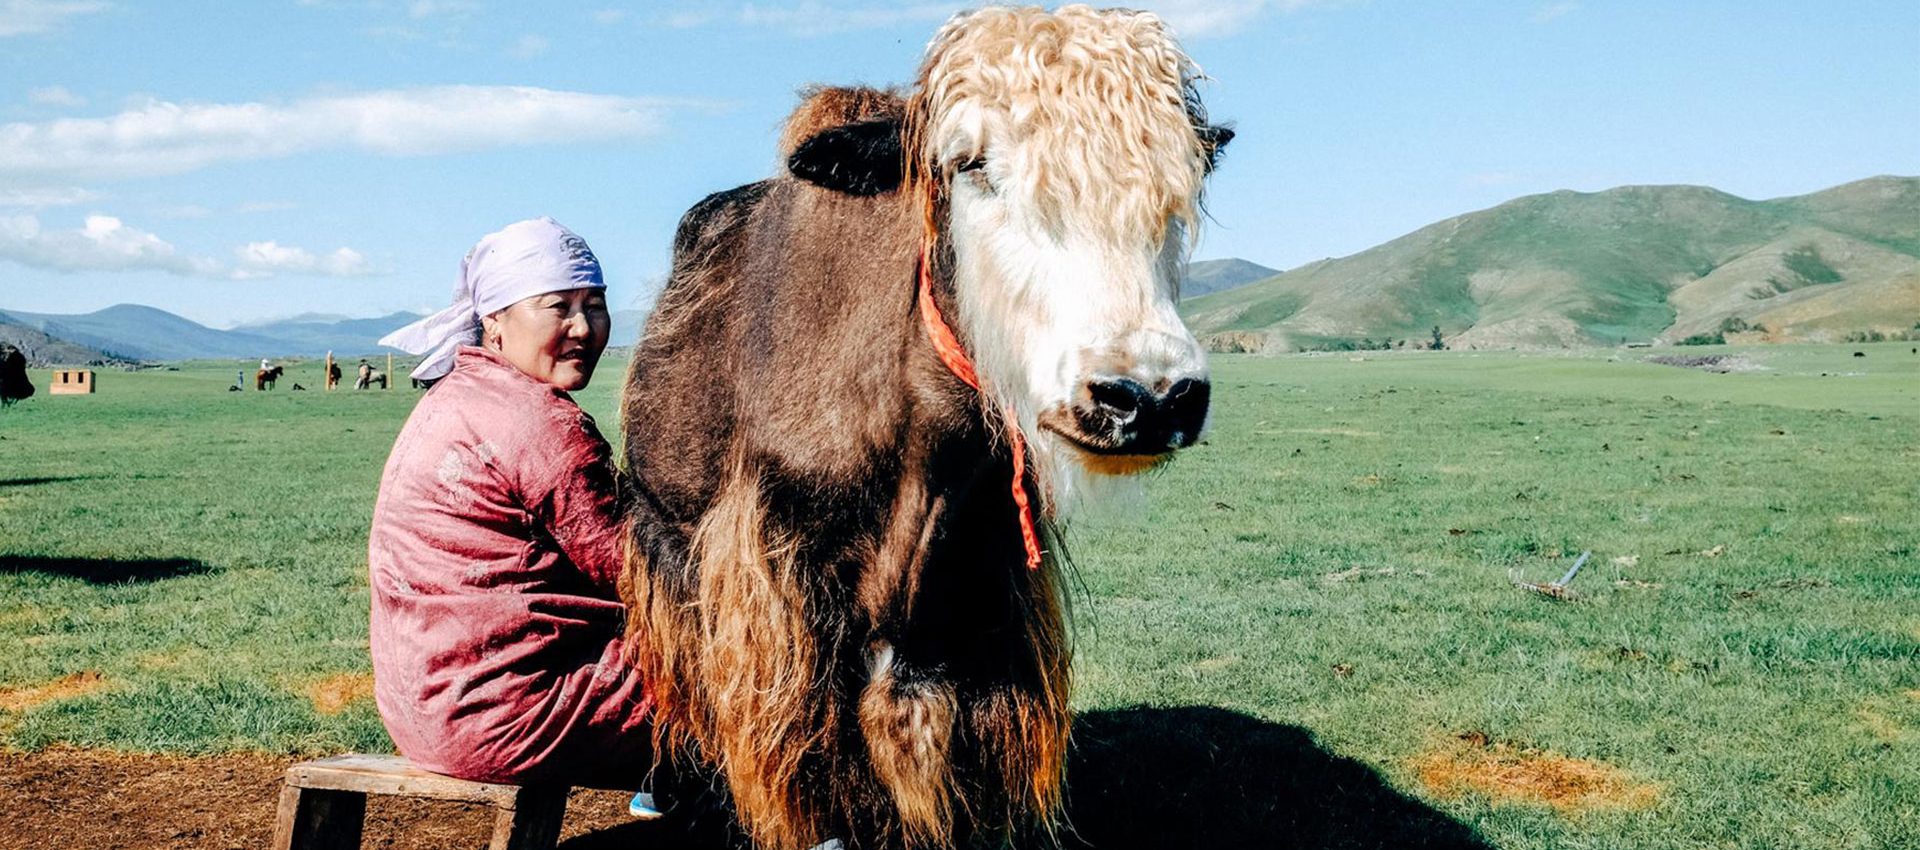 You will experience the true mongolian nomadic lifestyle, like milking yaks in the morning.